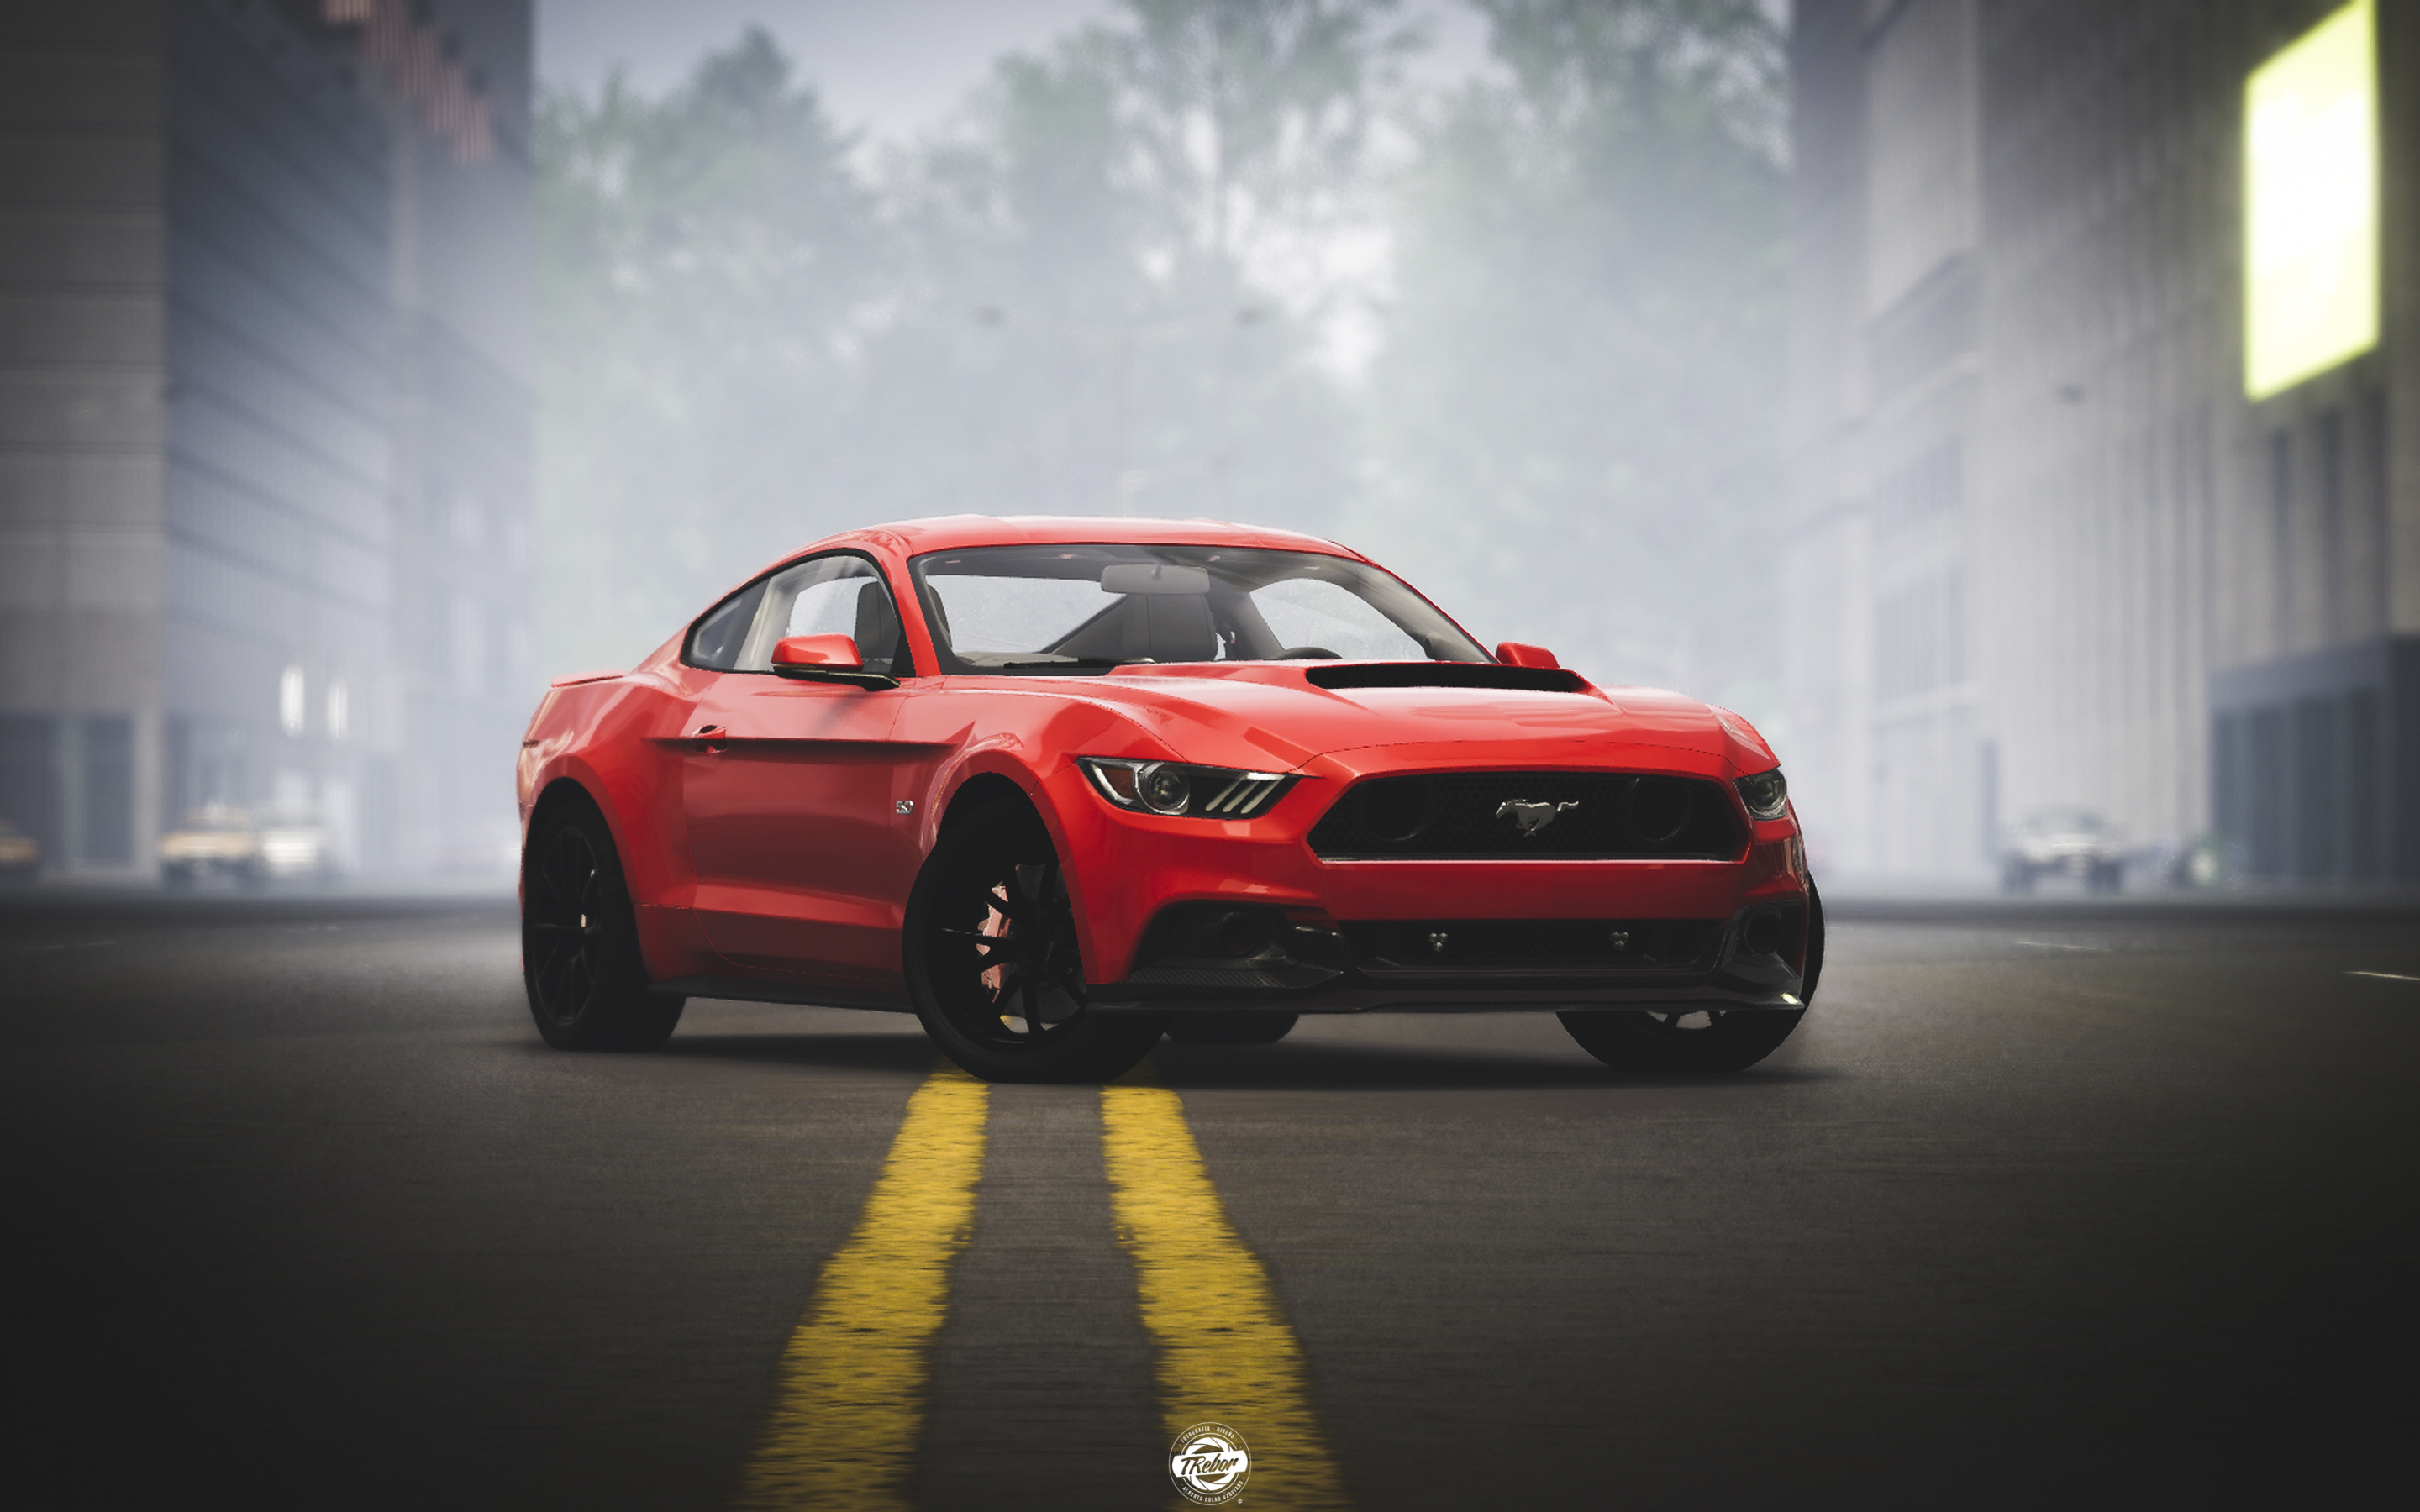 Ford Mustang, The Crew 2, video game, 2880x1800 wallpaper